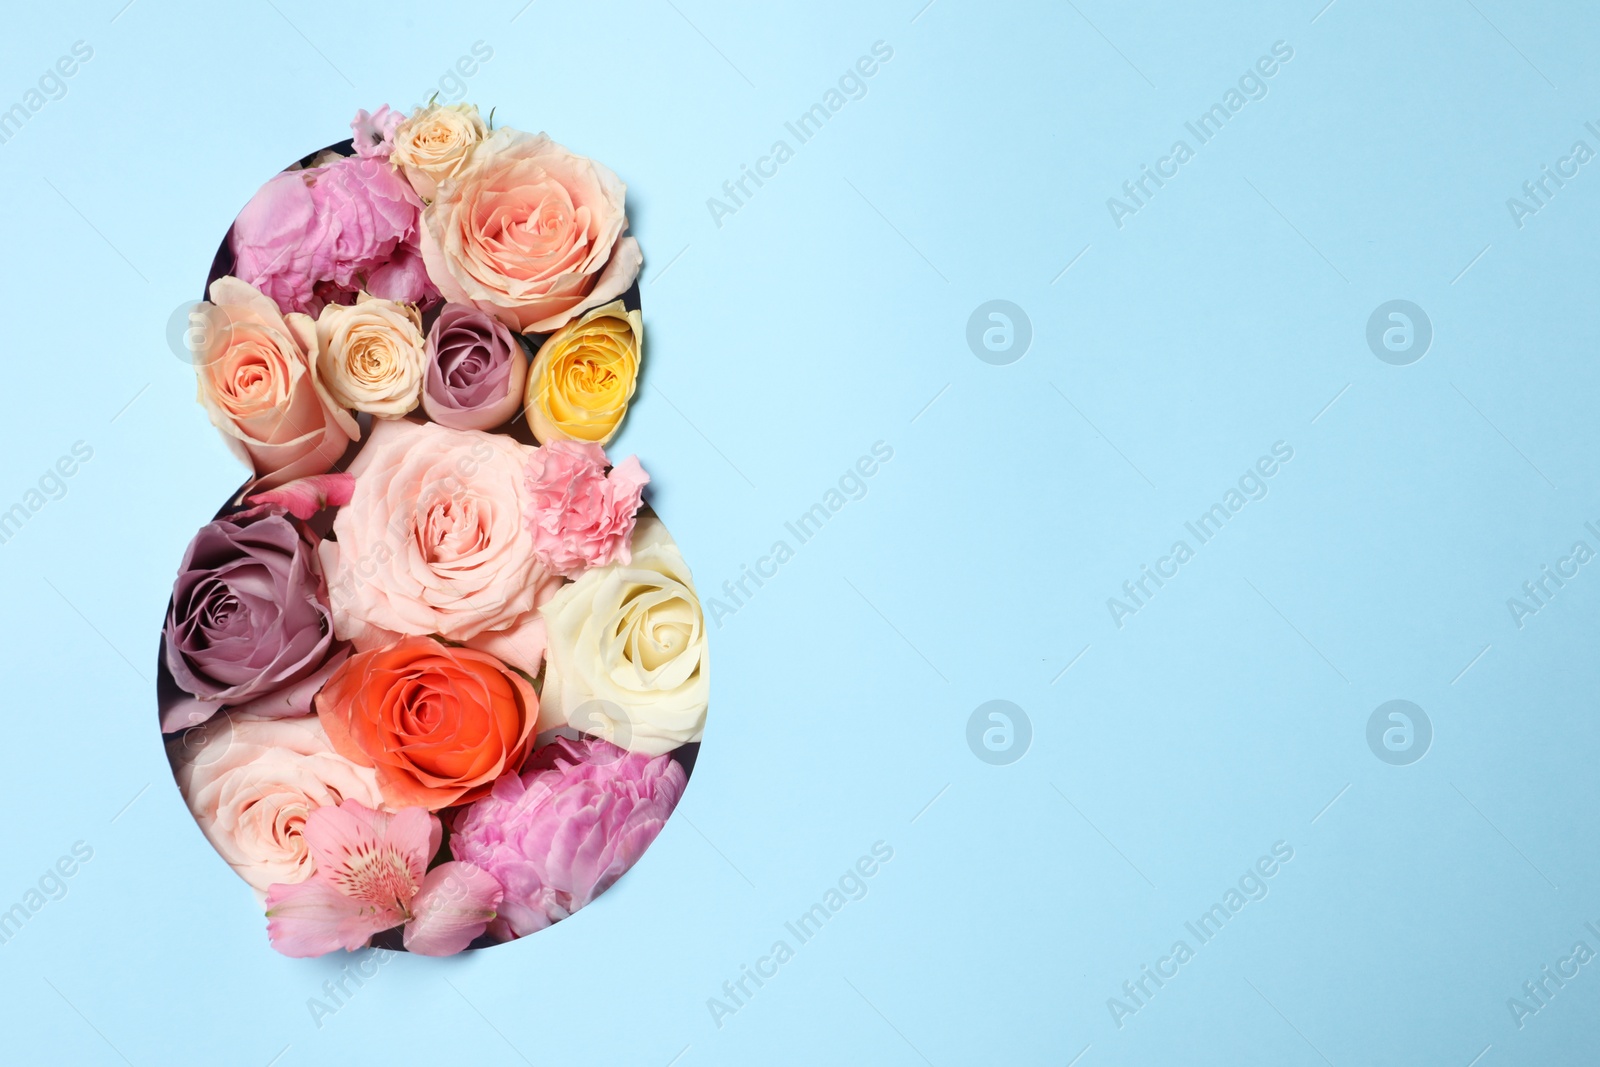 Photo of 8 March greeting card design with flowers and space for text, top view. Happy International Women's Day